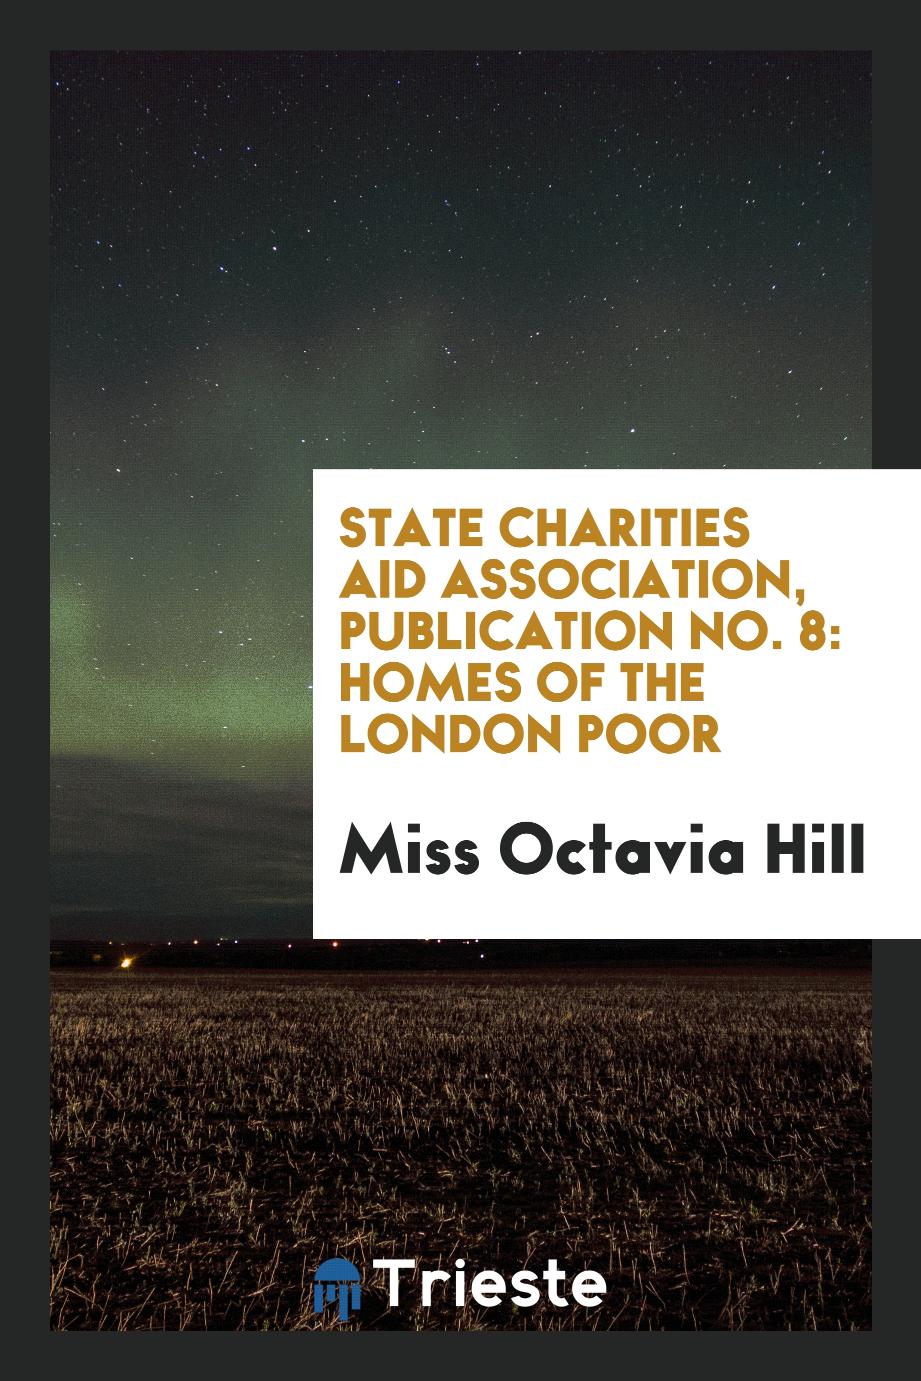 State Charities Aid Association, Publication No. 8: Homes of the London Poor